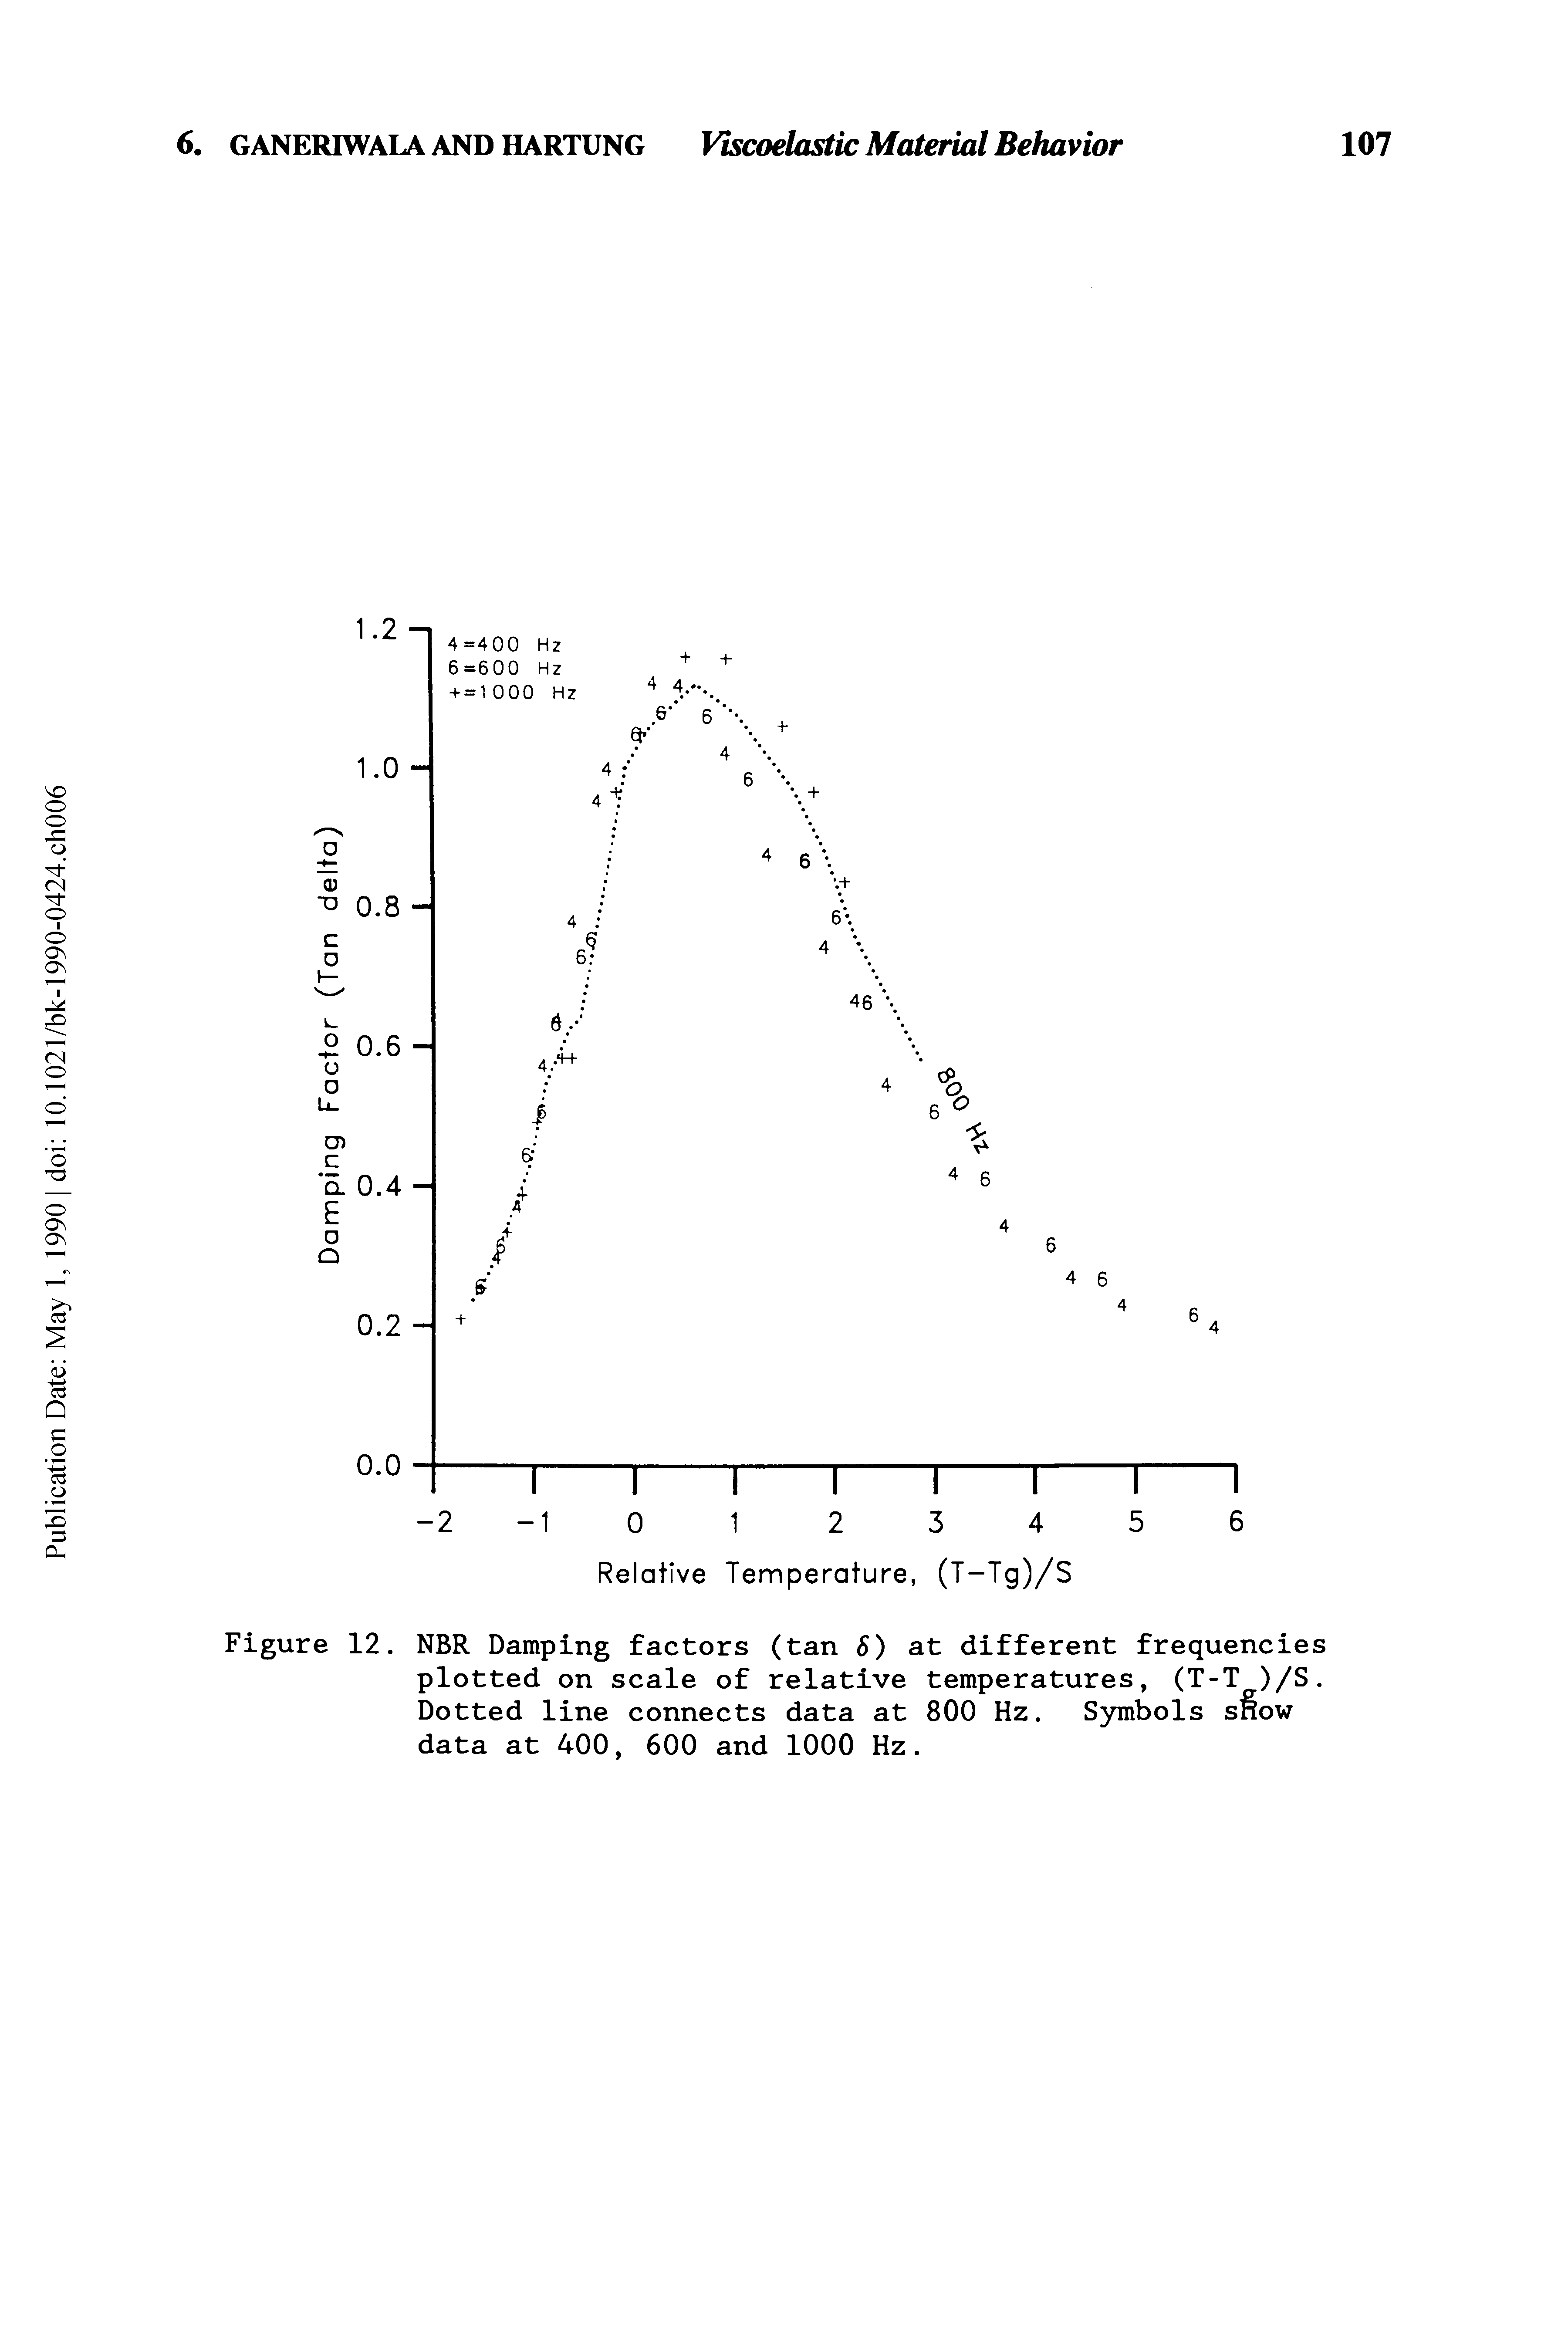 Figure 12. NBR Damping factors (tan 8) at different frequencies plotted on scale of relative temperatures, (T-T )/S. Dotted line connects data at 800 Hz. S nmbols snow data at 400, 600 and 1000 Hz.